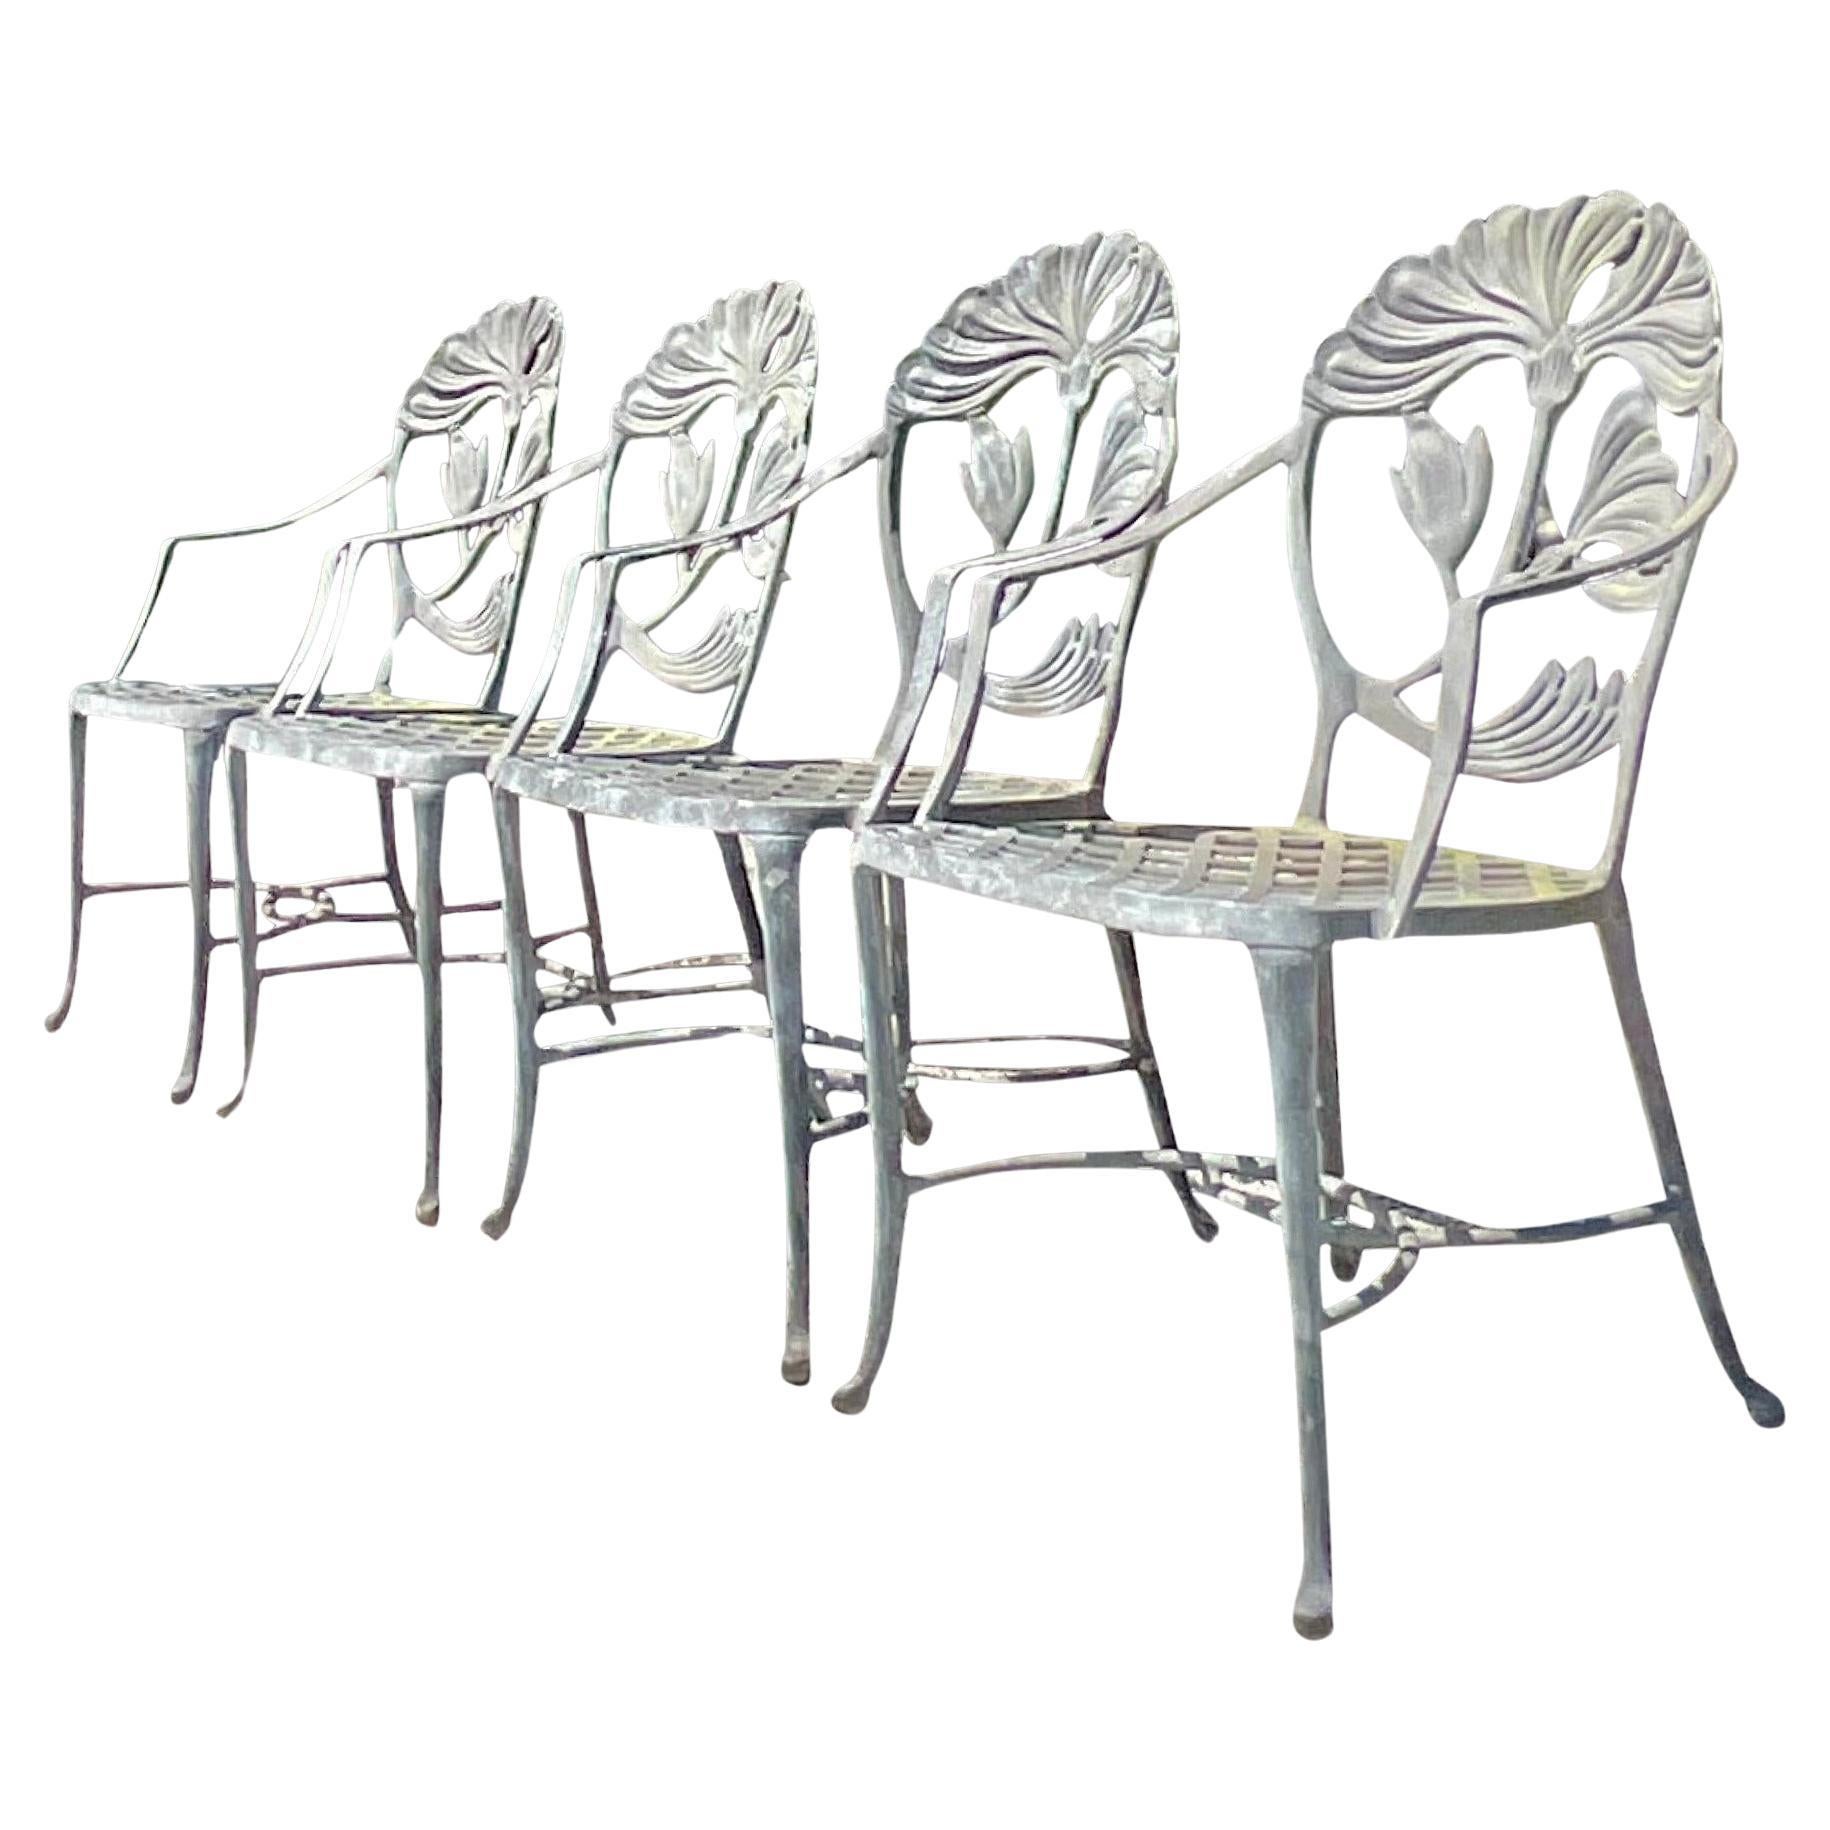 Vintage Coastal Cast Aluminum Lily Outdoor Dining Chairs - Set of 4